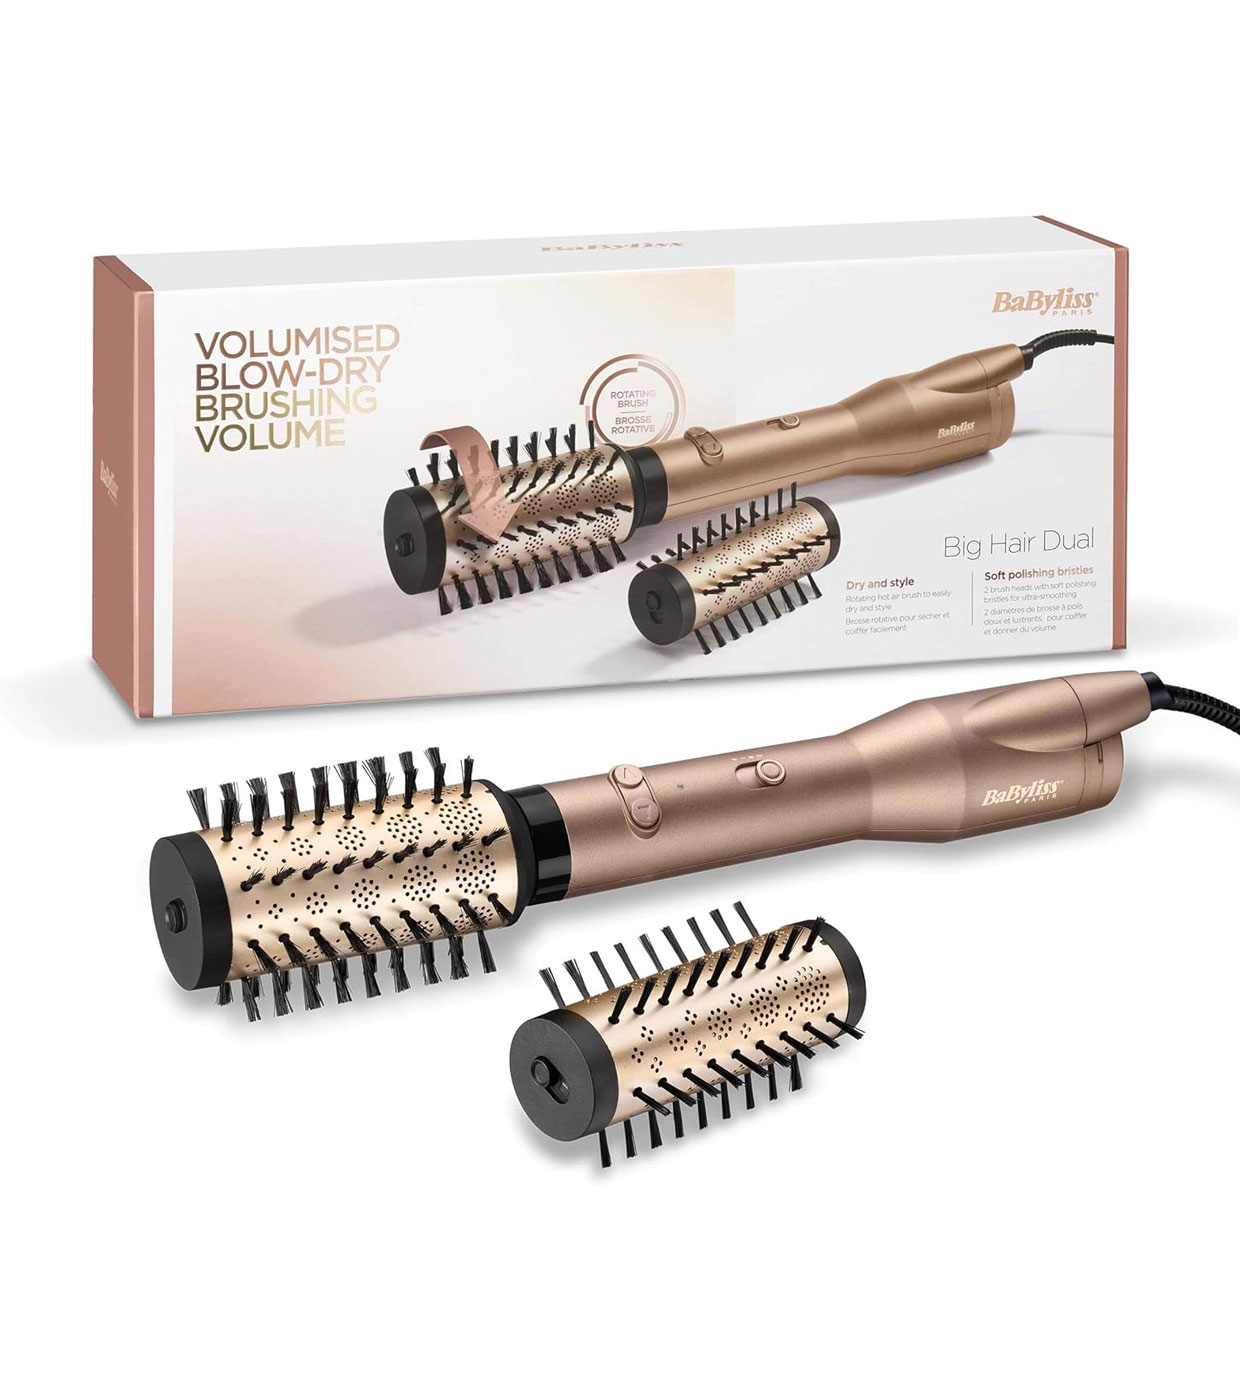 Acquistare Babyliss - Spazzola rotante per lo styling Big Hair Dual